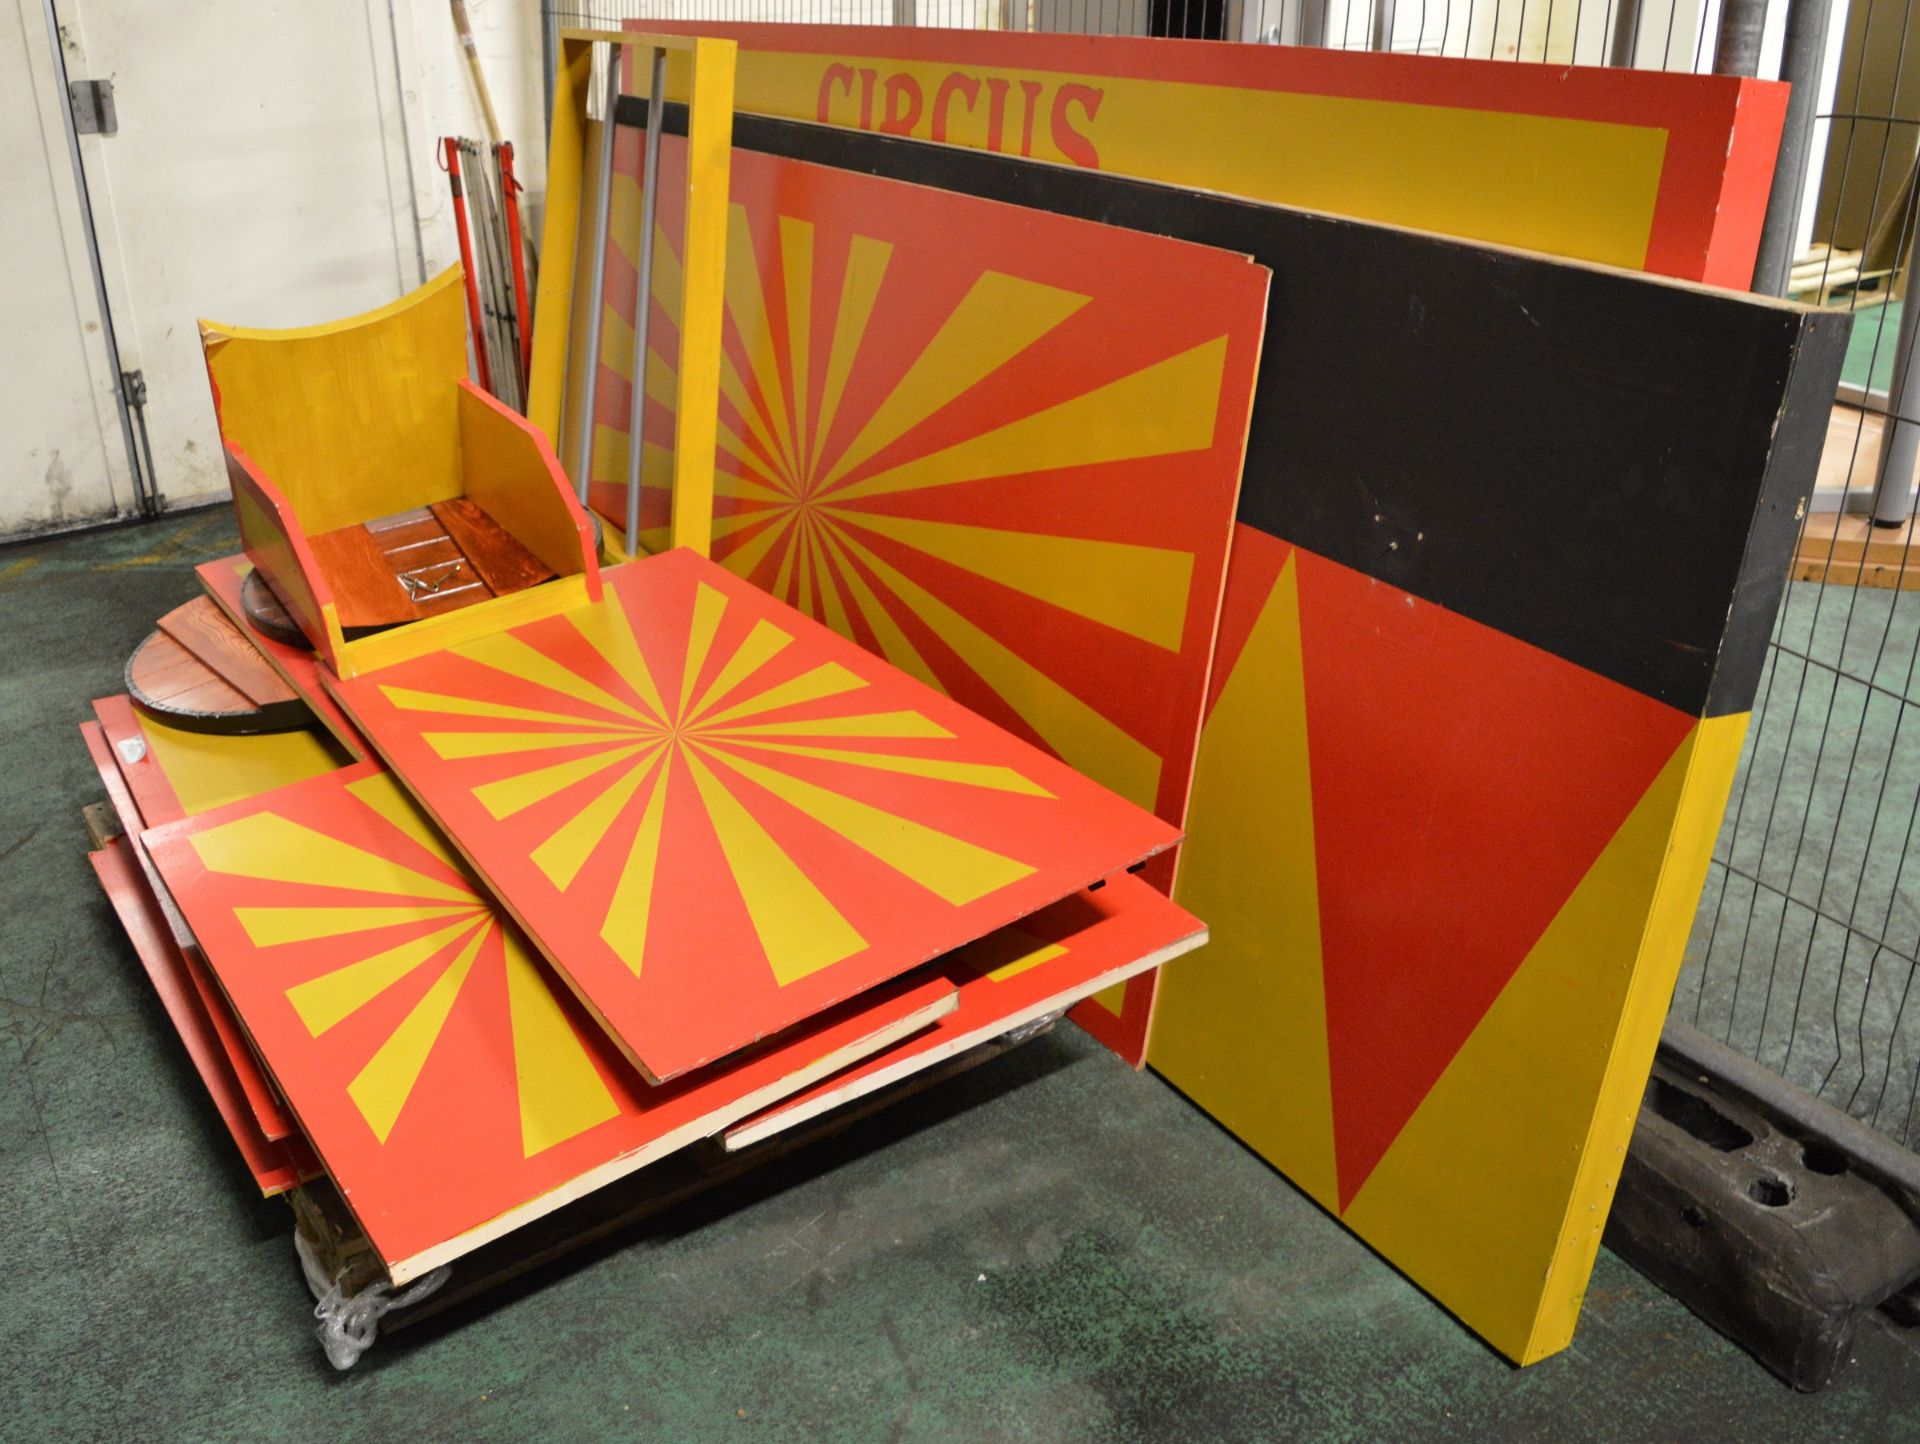 Wooden Circus Train/Wagon Stage Prop Unit - yellow & red design - Image 3 of 4